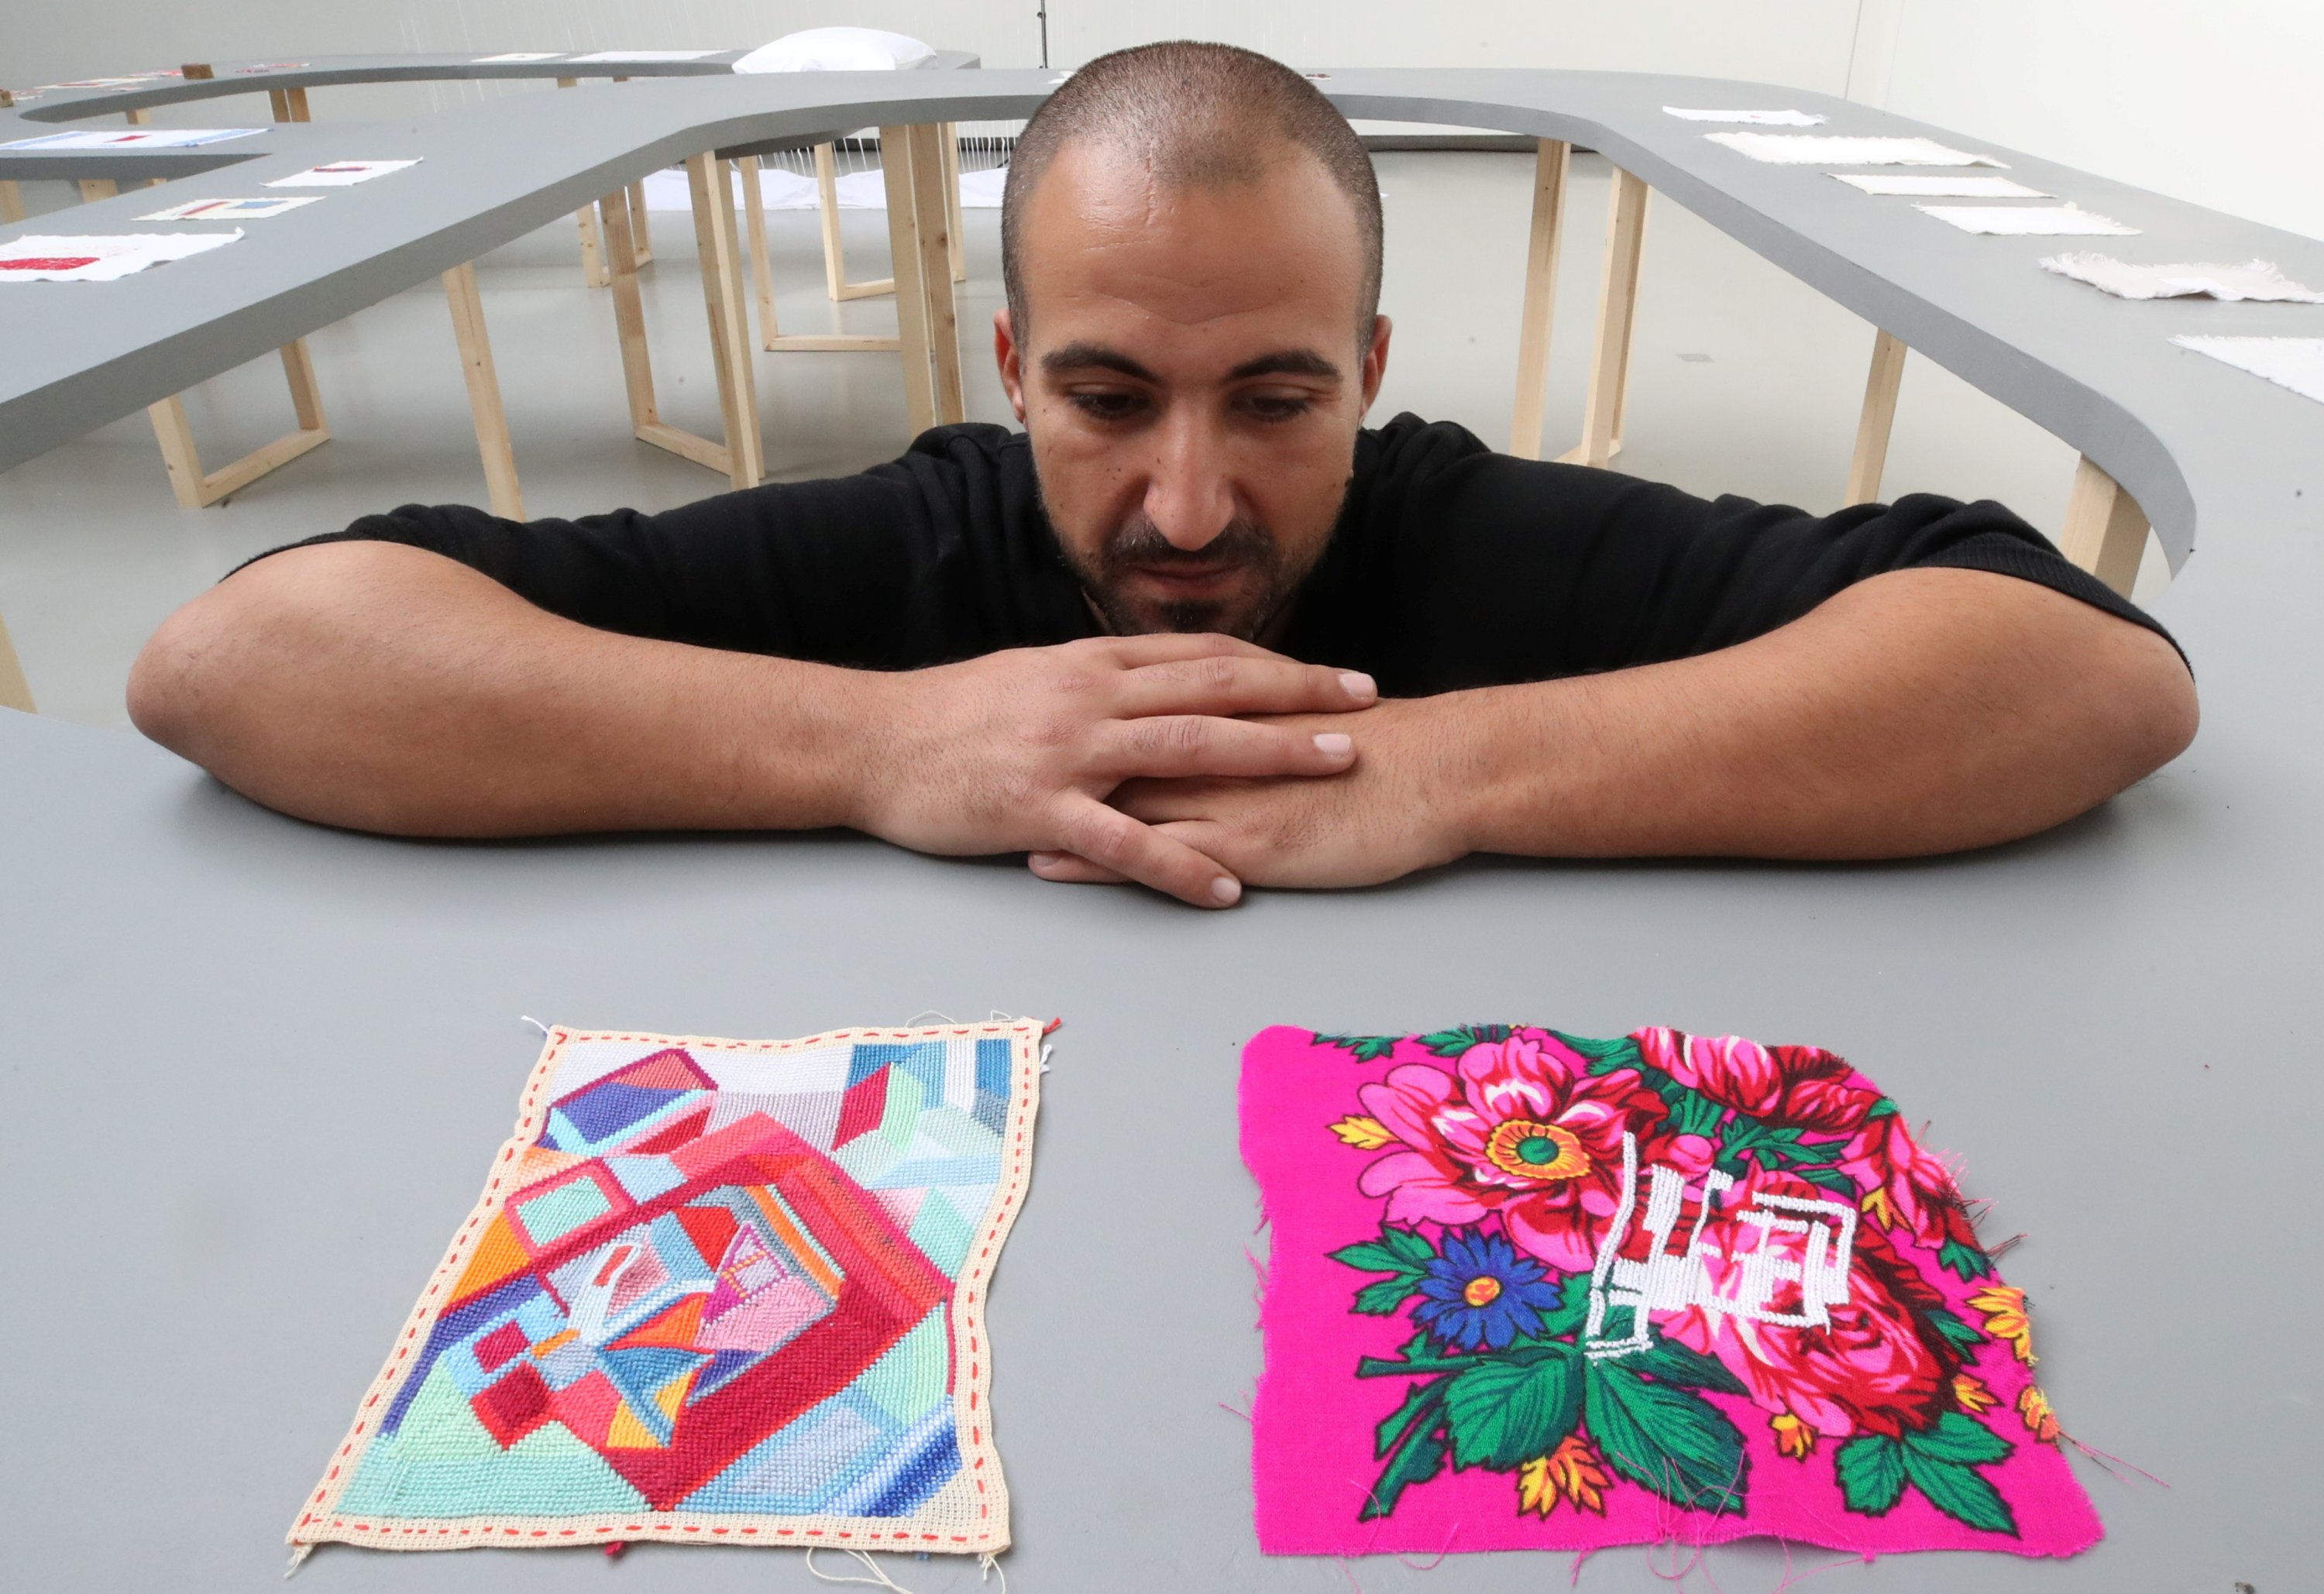 Palestinian artist Majd Abdel Hamid poses for Reuters during his exhibition "A Stitch in Times" in Brussels, Belgium Oct. 5, 2021.  (Reuters Photo)